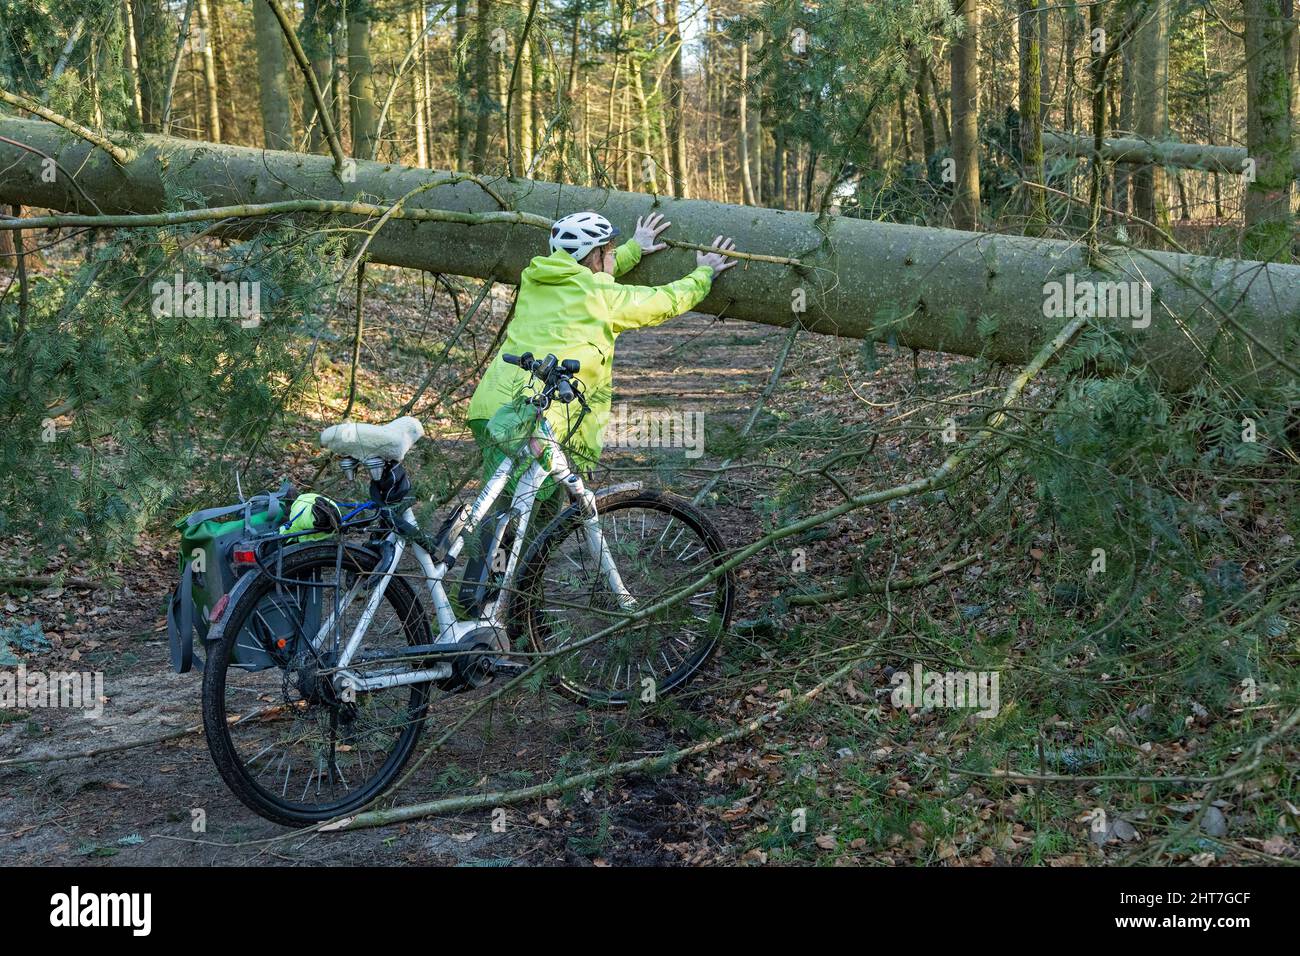 Woman over 50, cycling tour through forest with her e-bike, tree blocking path, hopeless attempt to clear tree away, Lueneburg, Lower Saxony, Germany Stock Photo